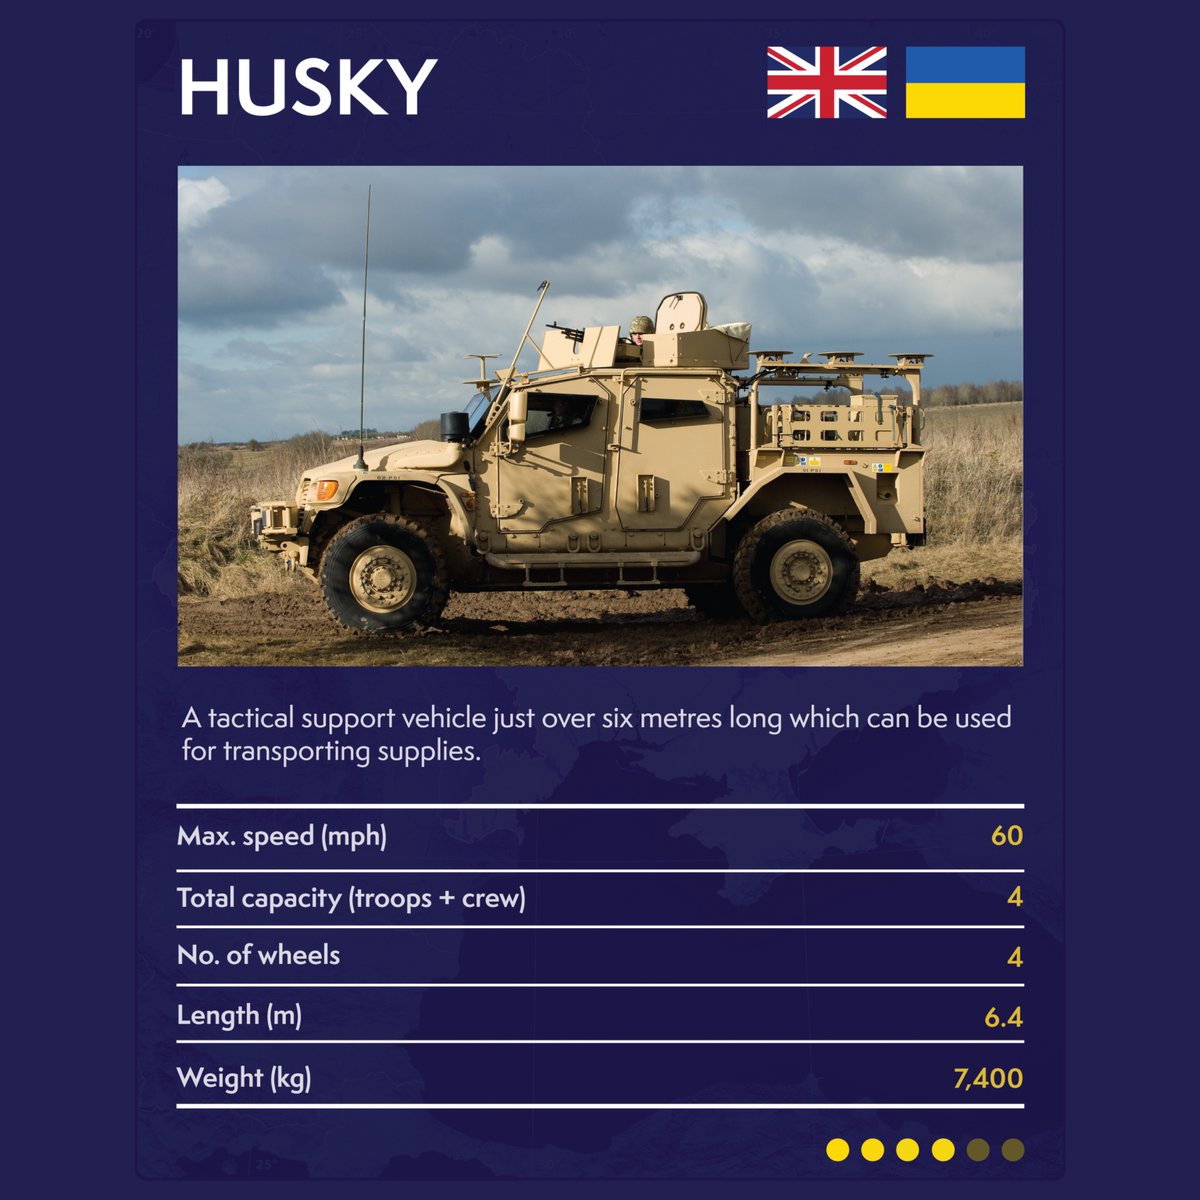 The UK is delivering its largest ever military aid package to Ukraine. Alongside £500m in military funding, the UK is providing vital equipment: ✅ 4 million round of ammunition ✅ More than 1,600 missiles ✅ 400 vehicles - including 160 Husky vehicles 🇺🇦#StandWithUkraine